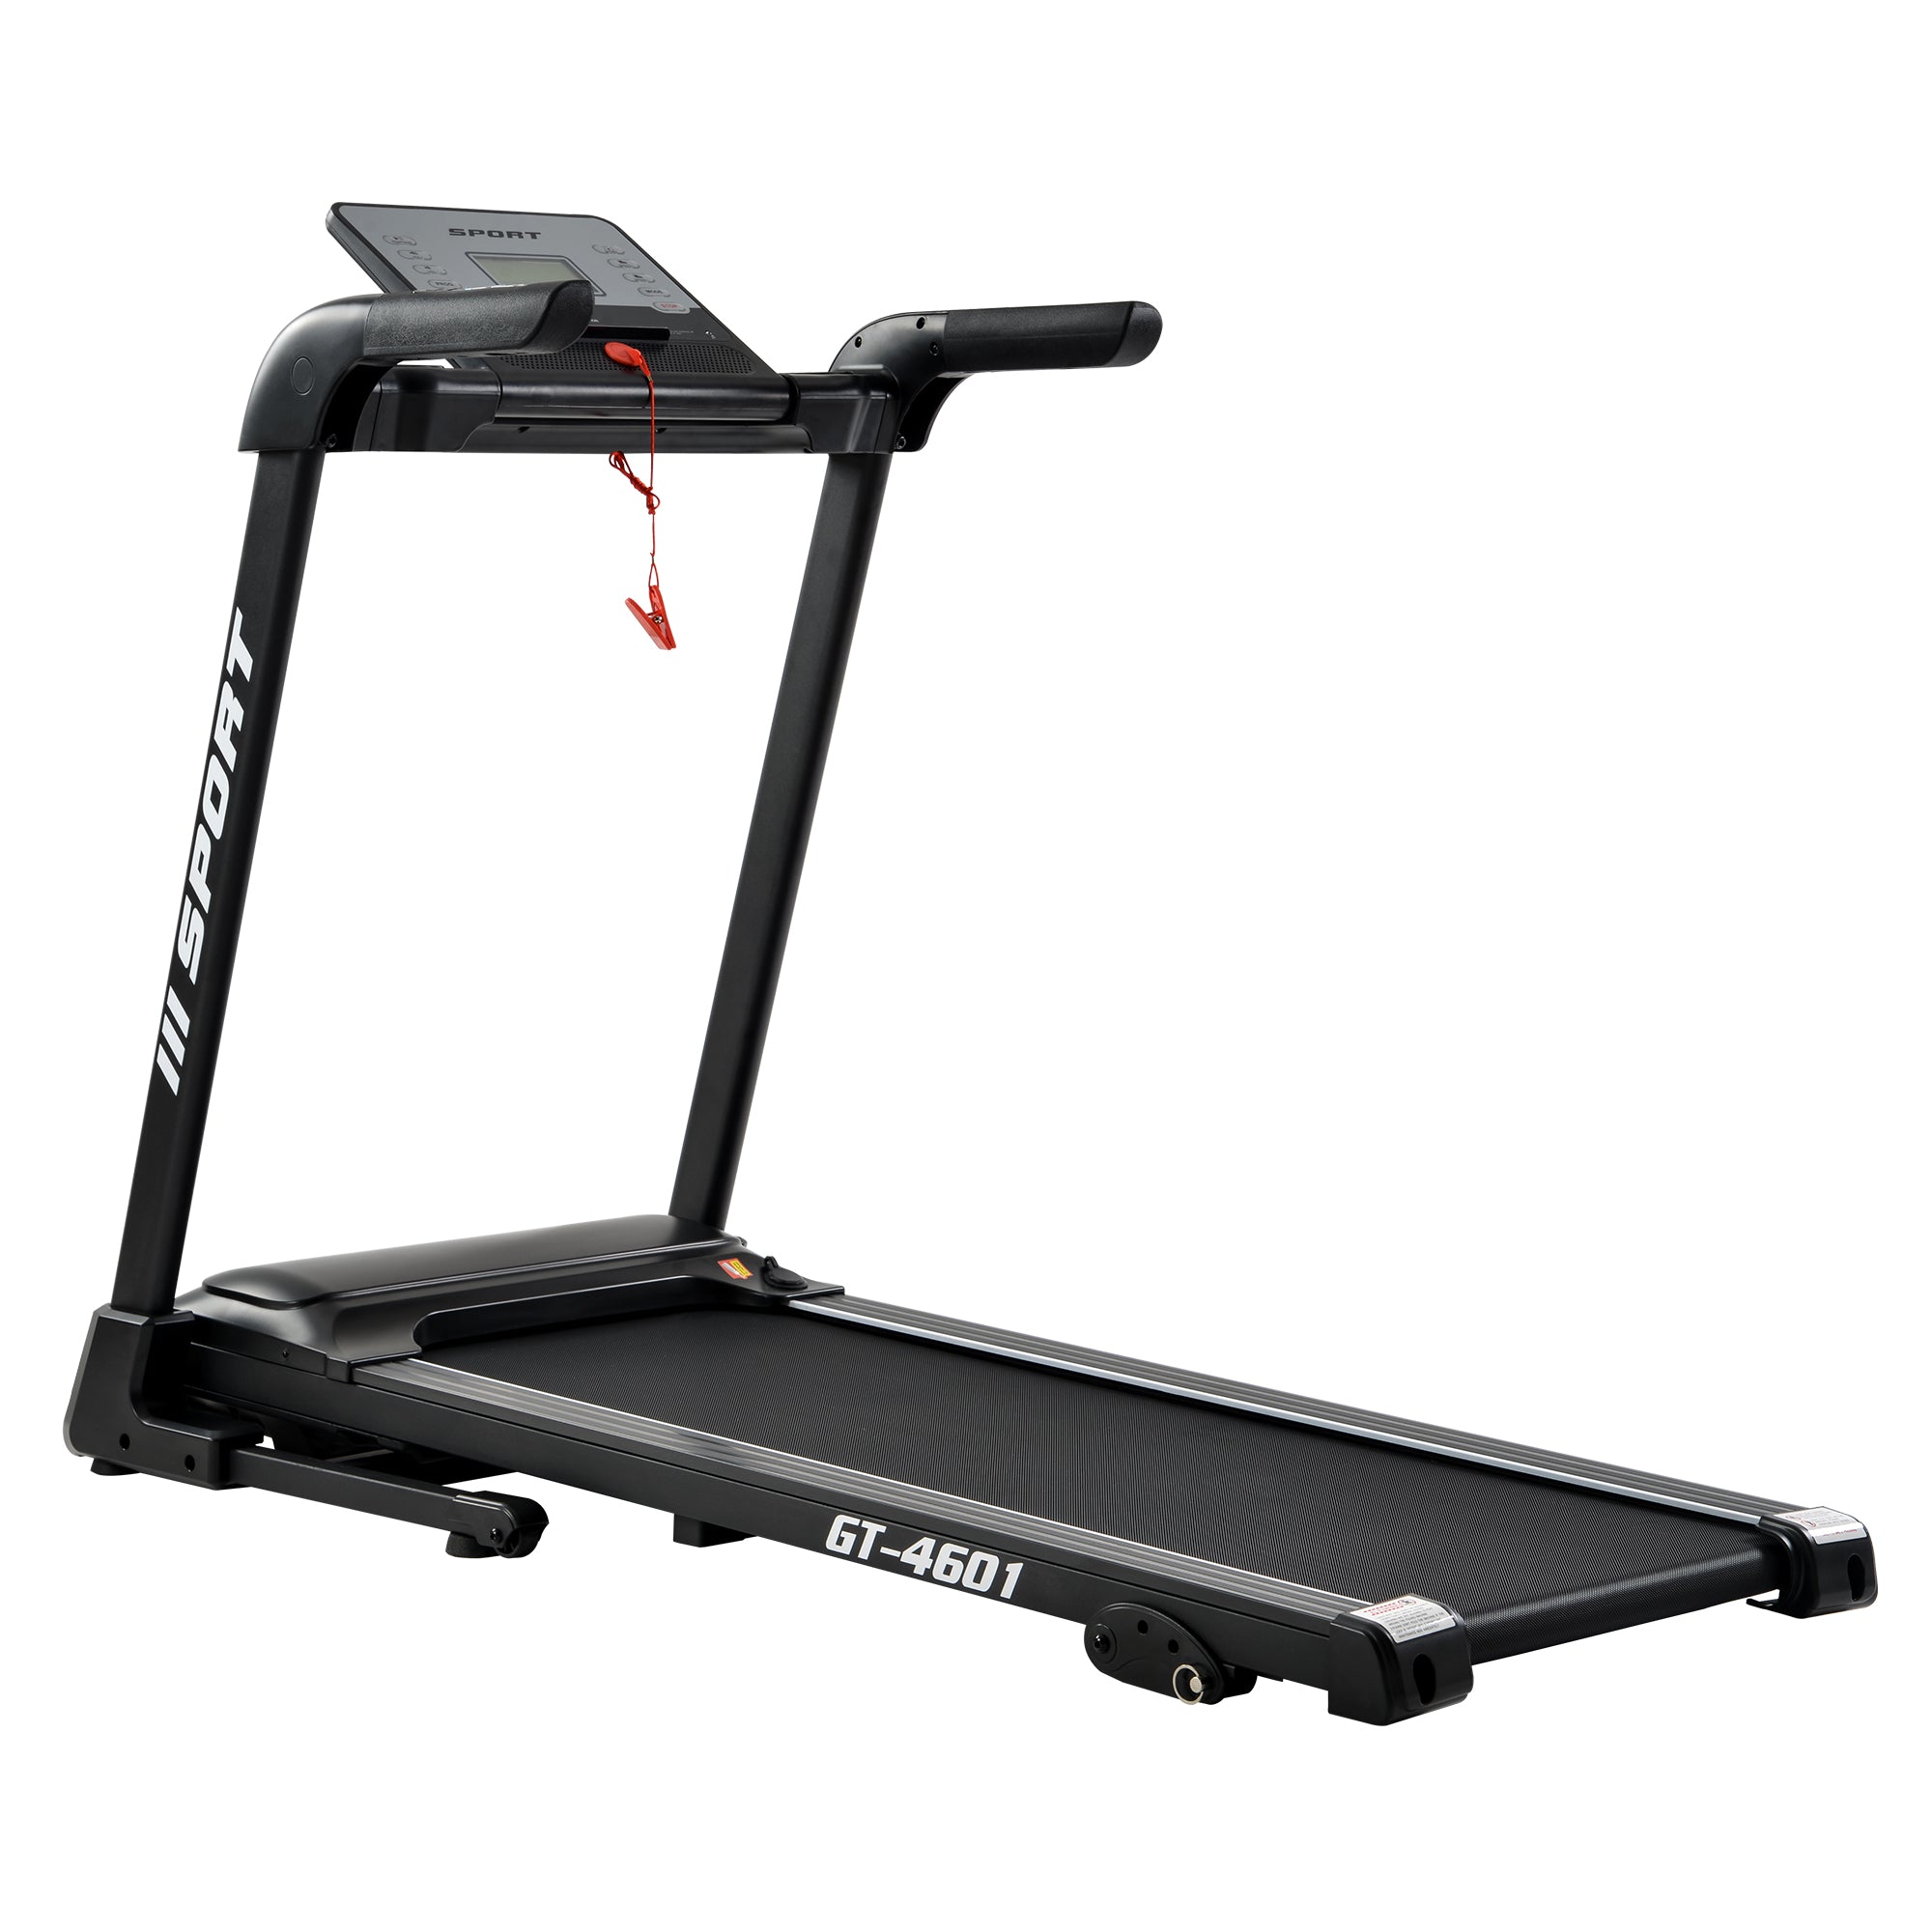 4.25" LCD Display, 2.25hp treadmill with Speaker,Aux and USB input,12 speeds and 3 incline Levels